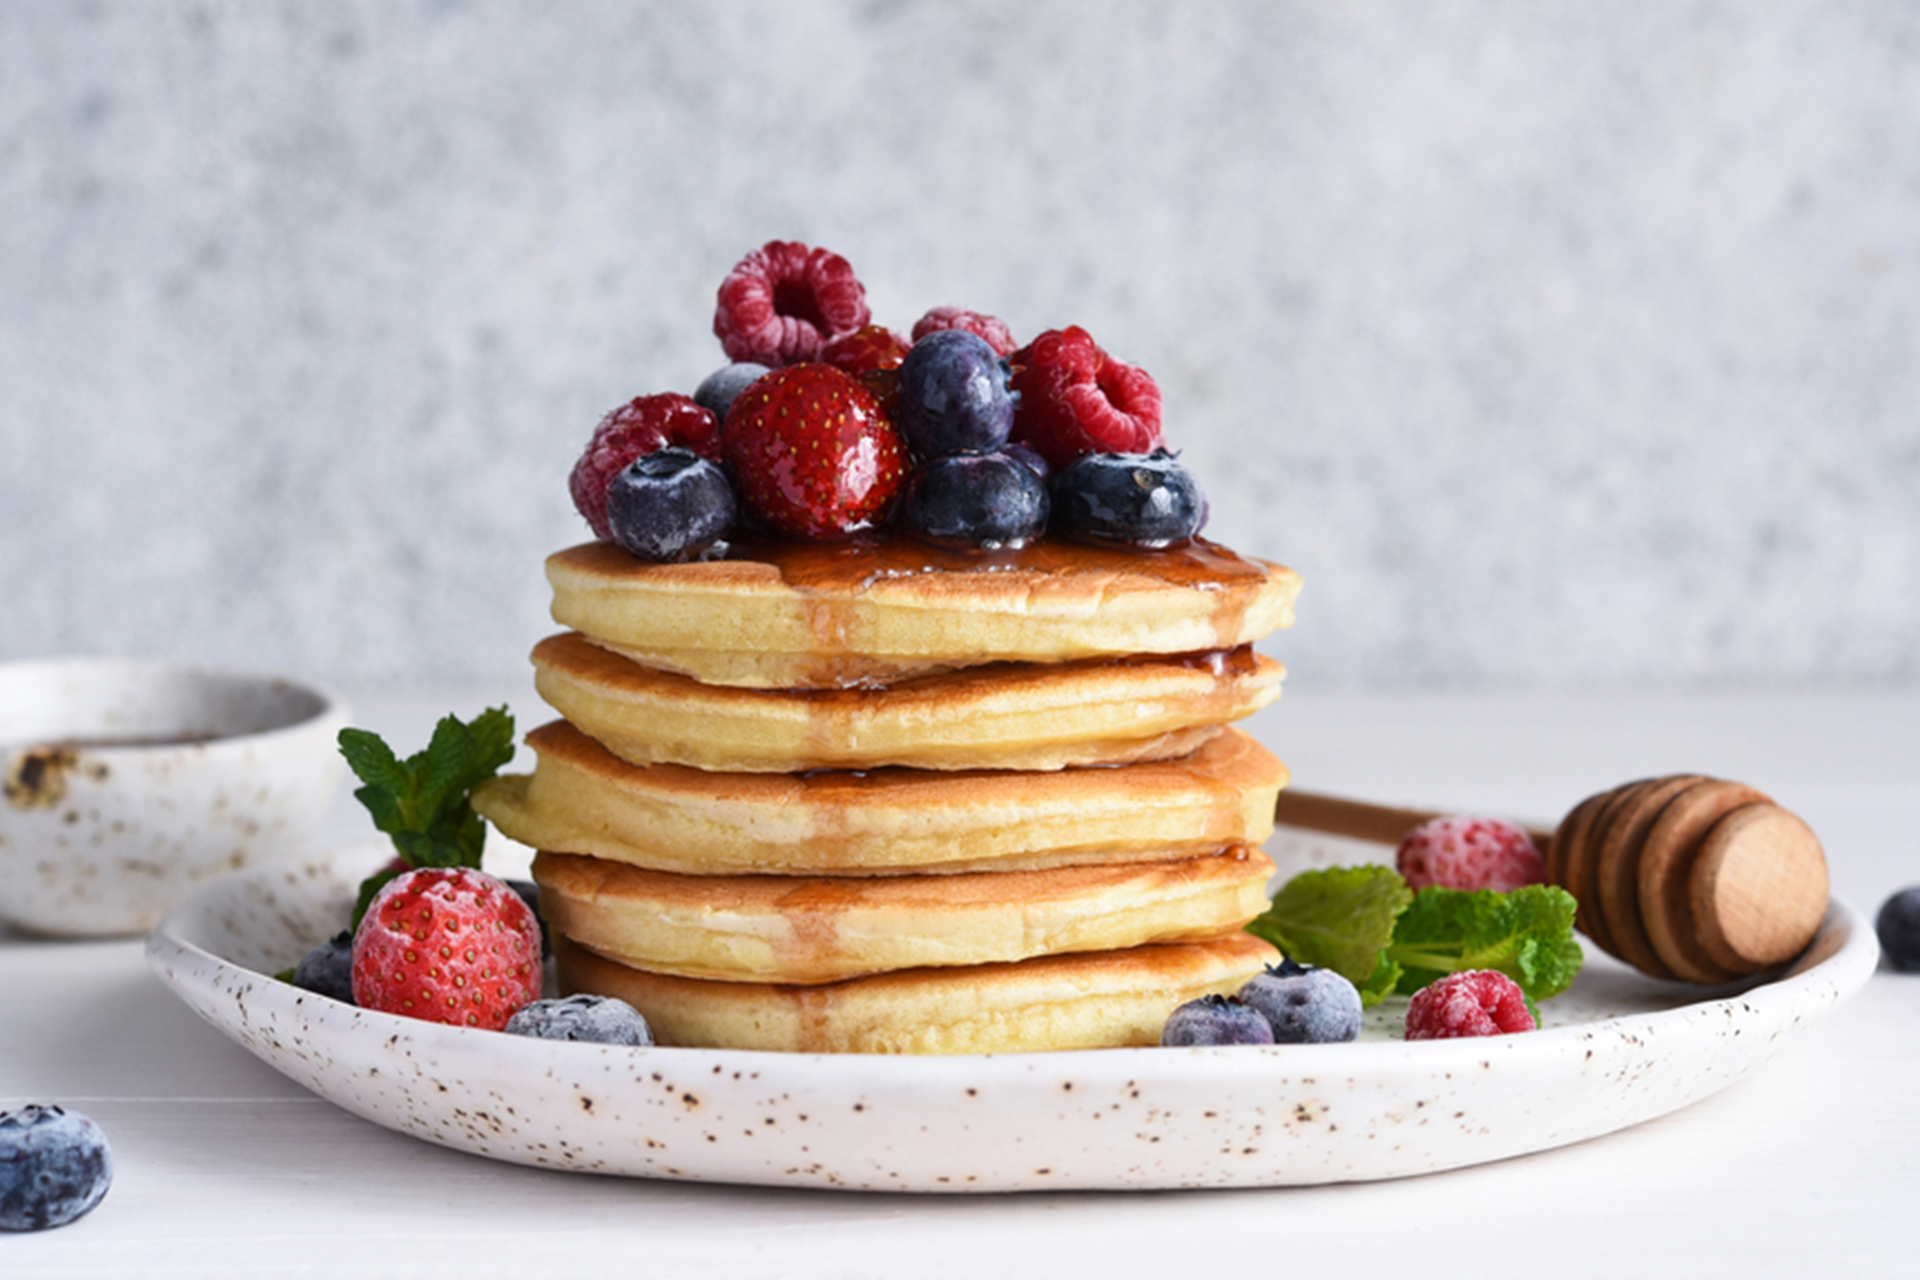 Stack of pancakes with berries on top